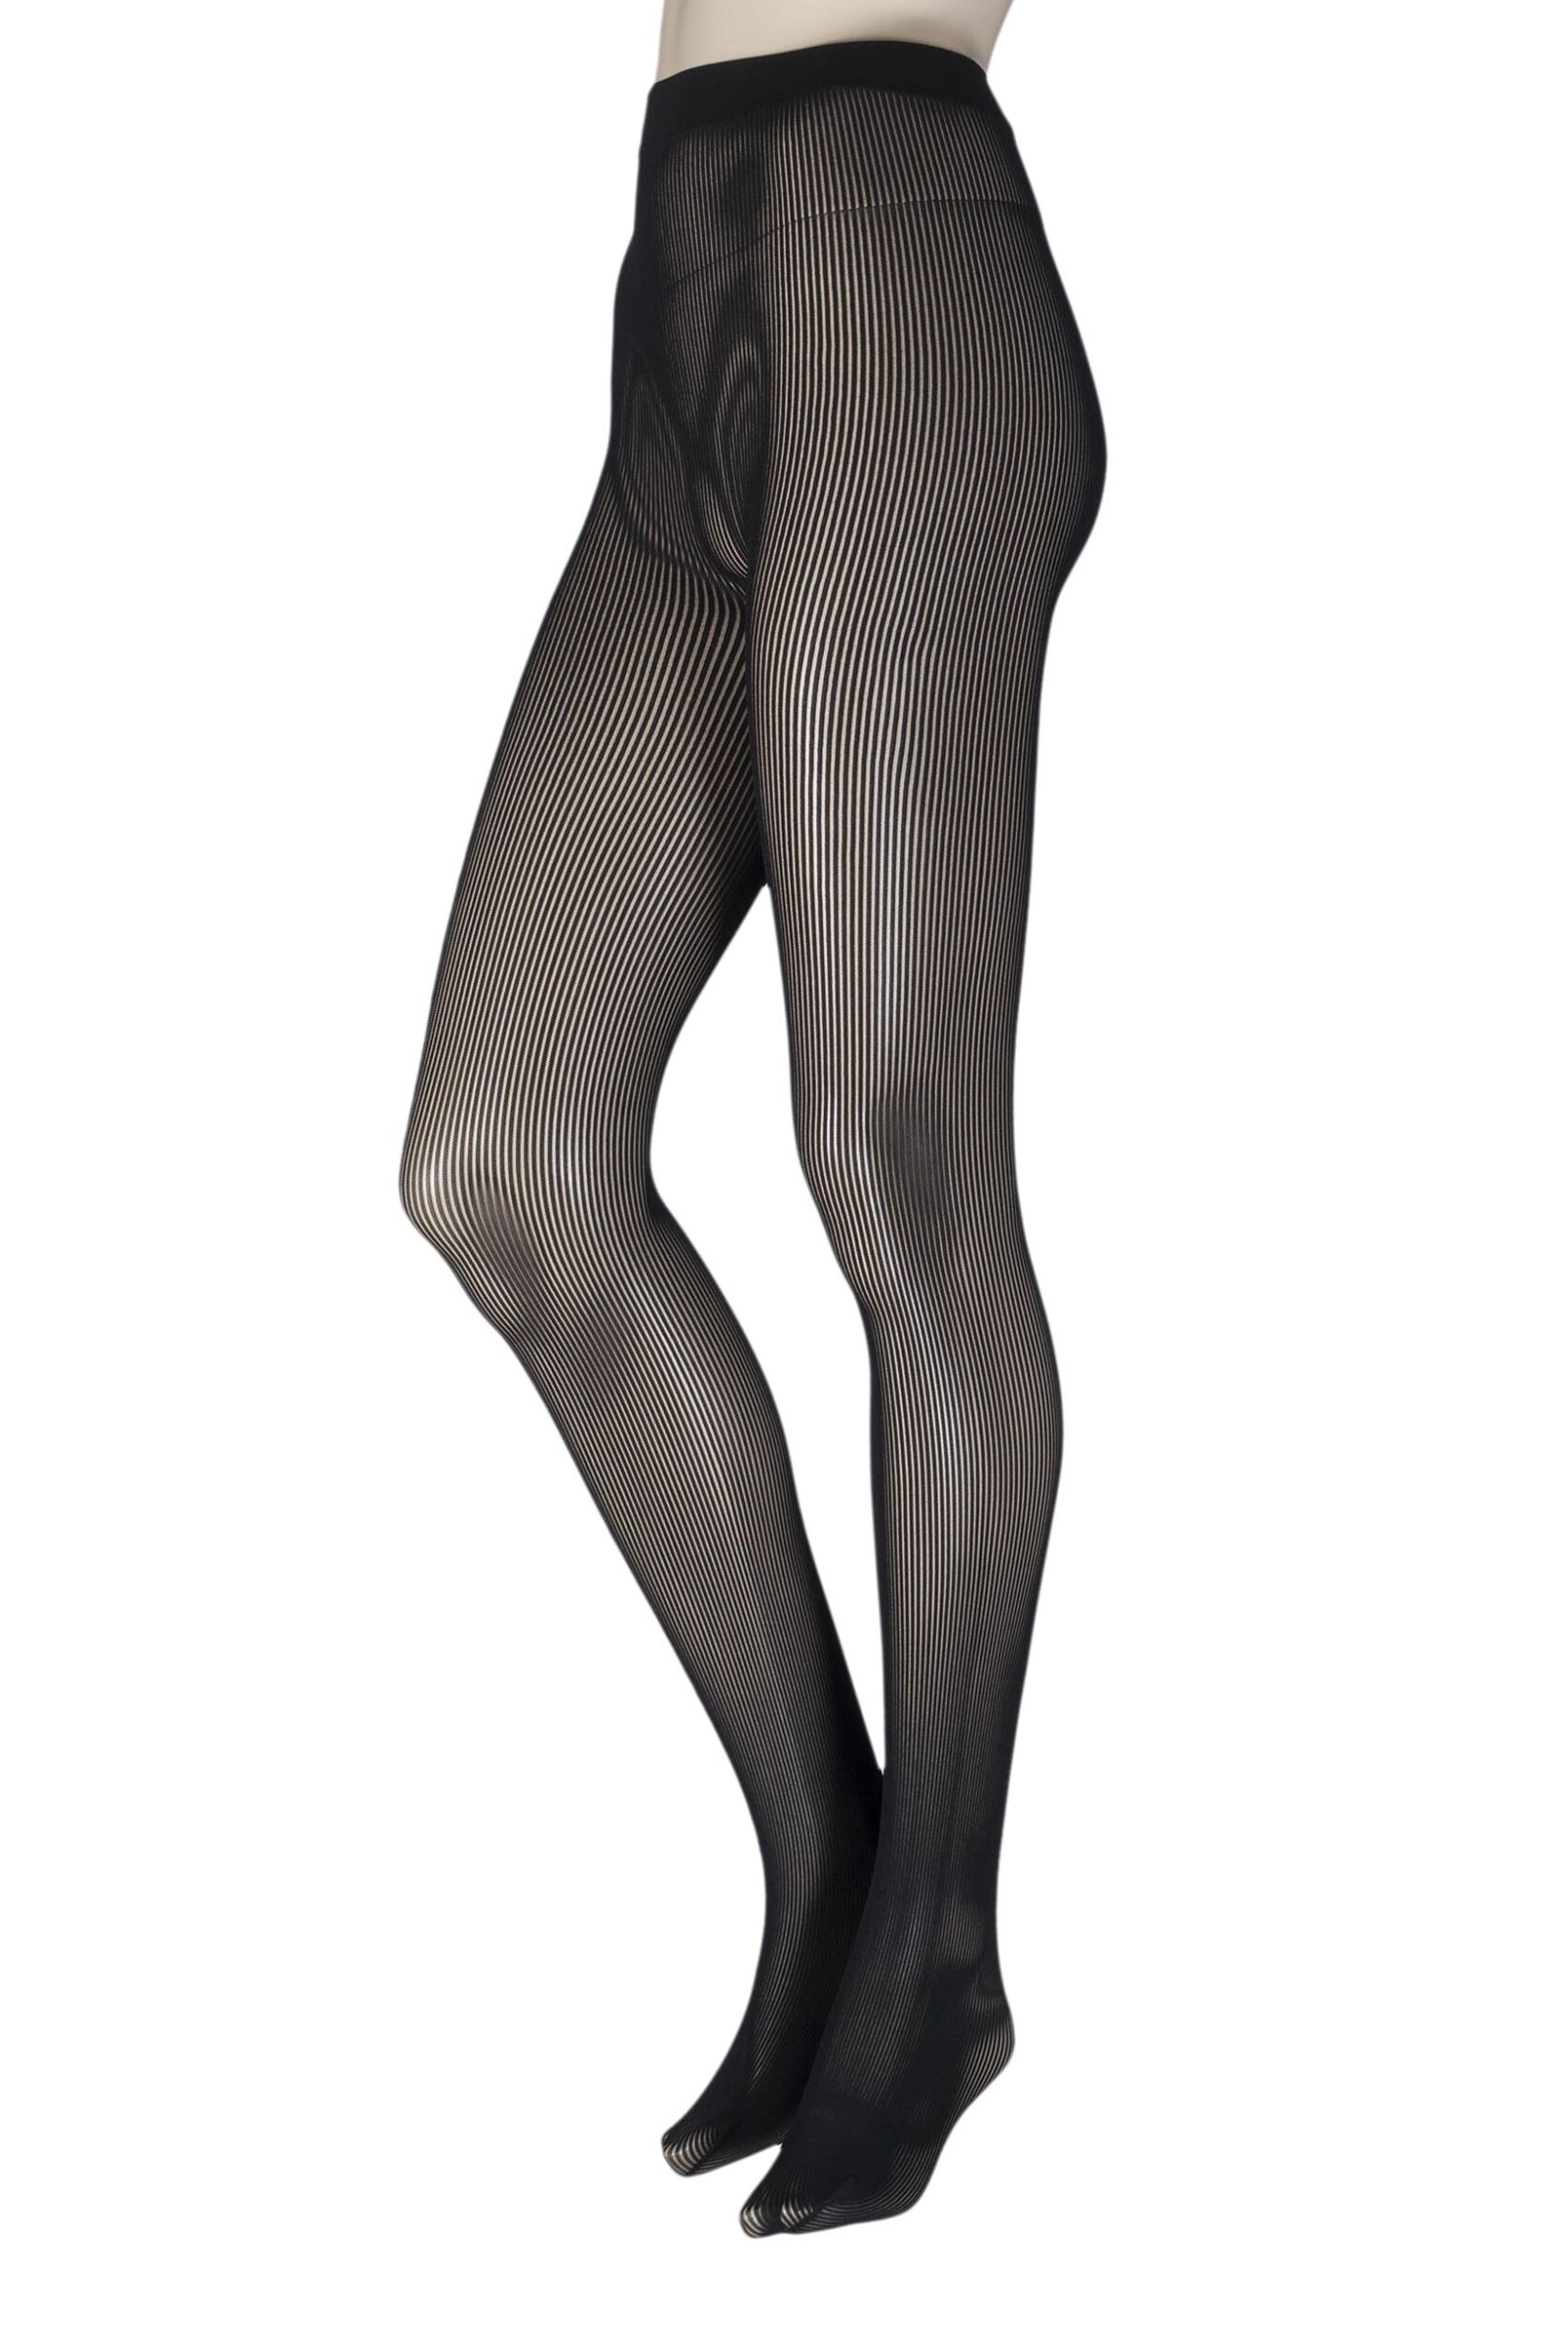 Image of Ladies 1 Pair Couture by Silky Ultimates Seamless and Ladder Proof Opaque Ribbed Tights